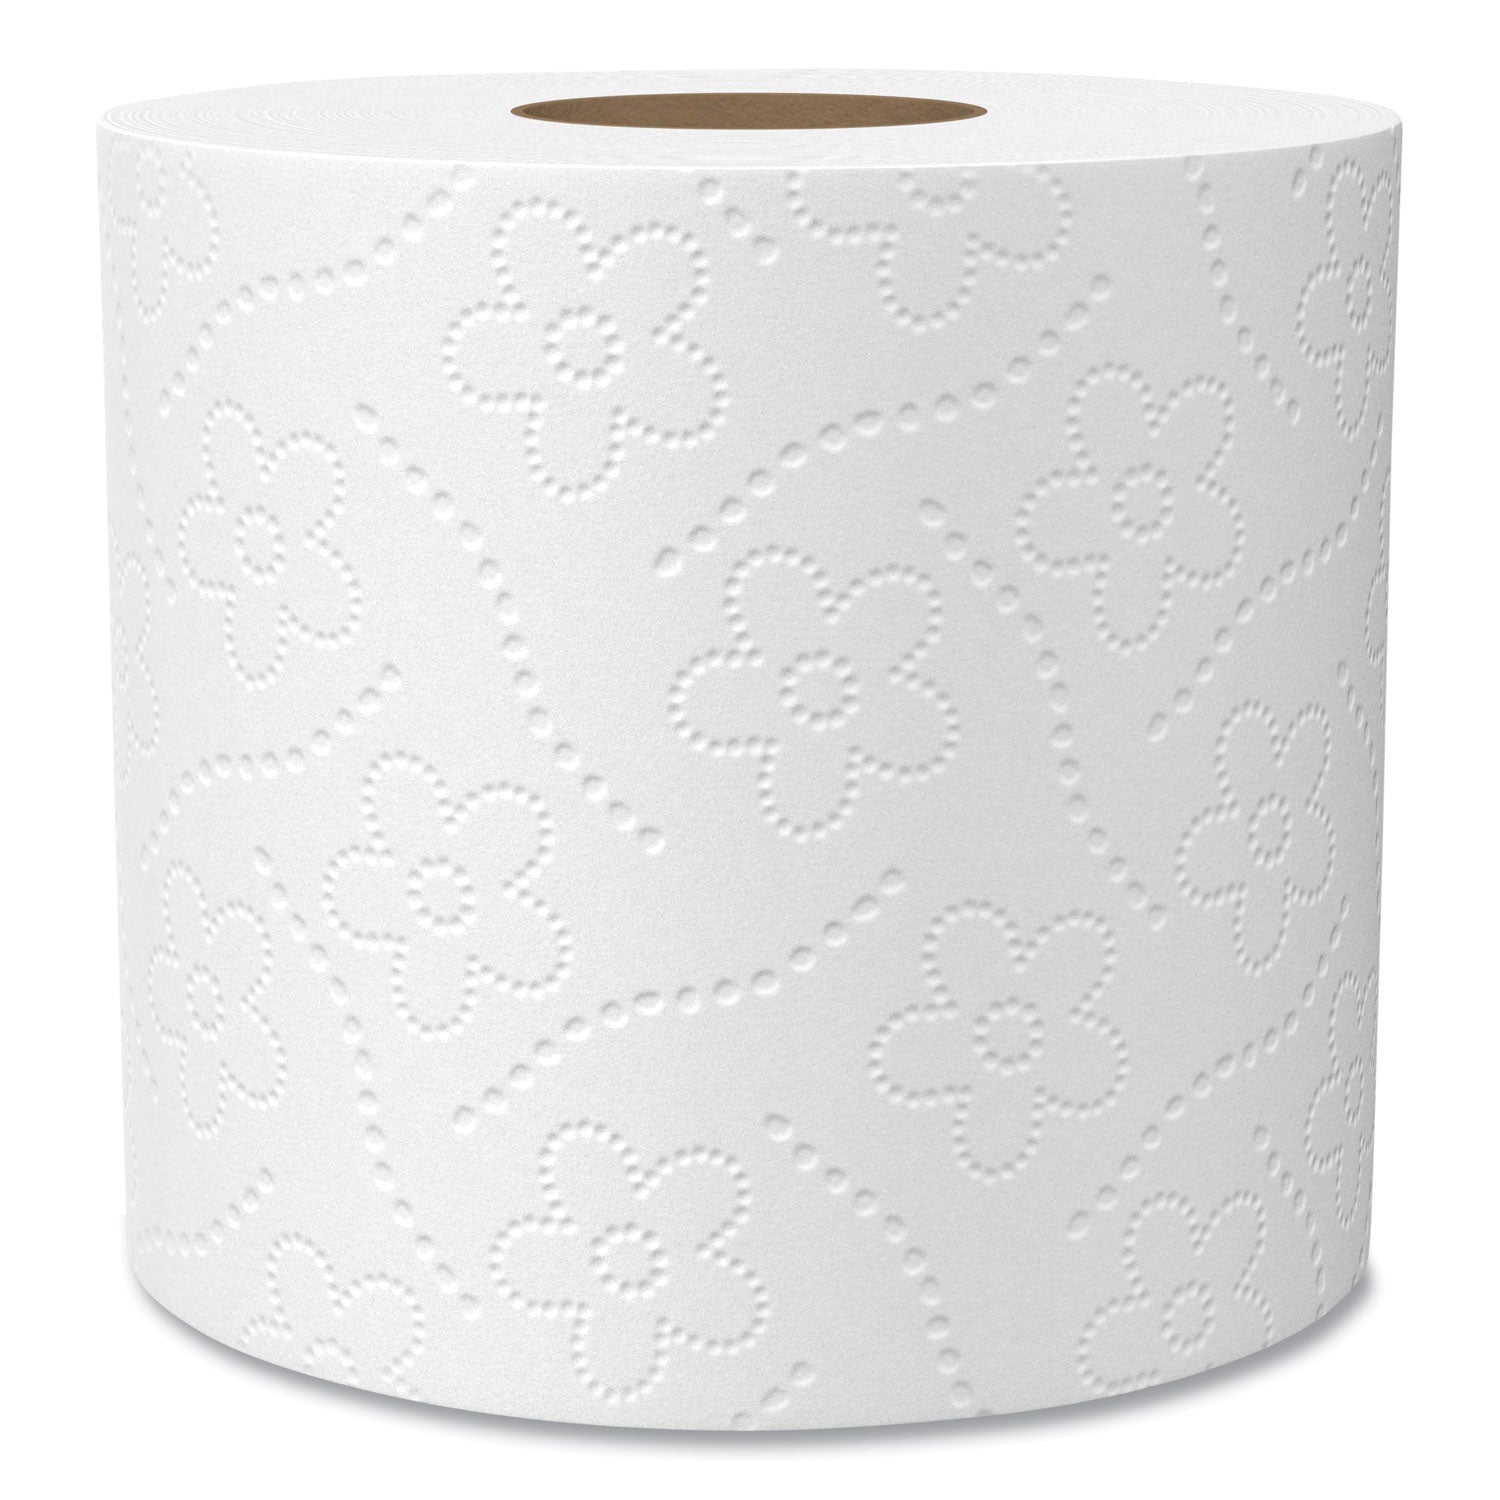 100%-recycled-bathroom-tissue-septic-safe-2-ply-white-240-sheets-roll-24-pack-2-packs-carton_sev13738ct - 2